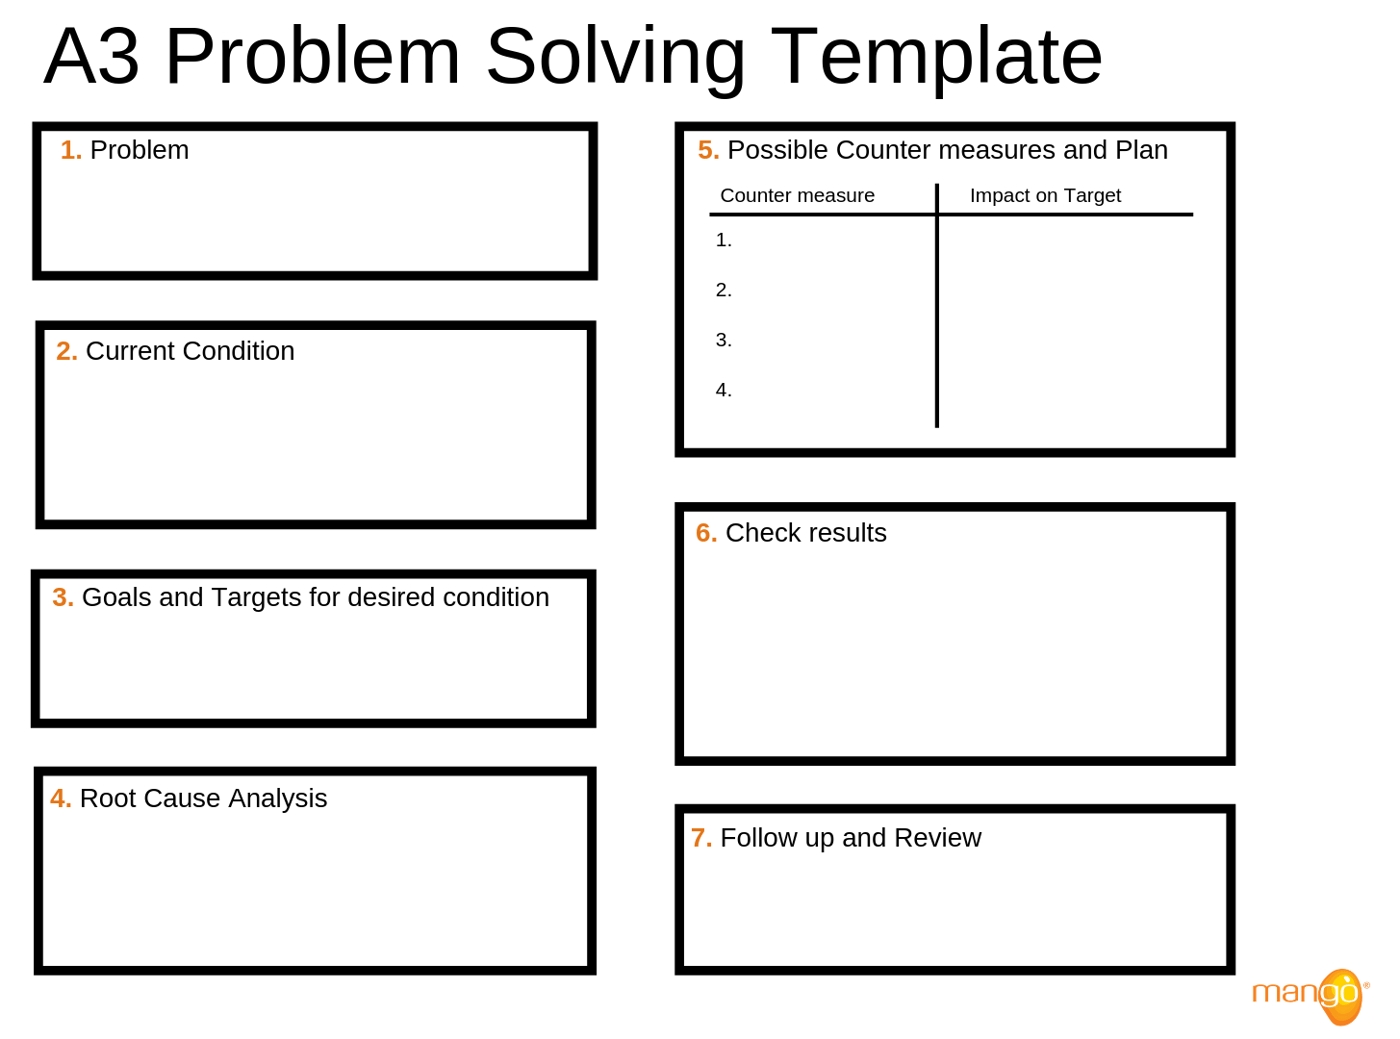 a3 problem solving process be used for